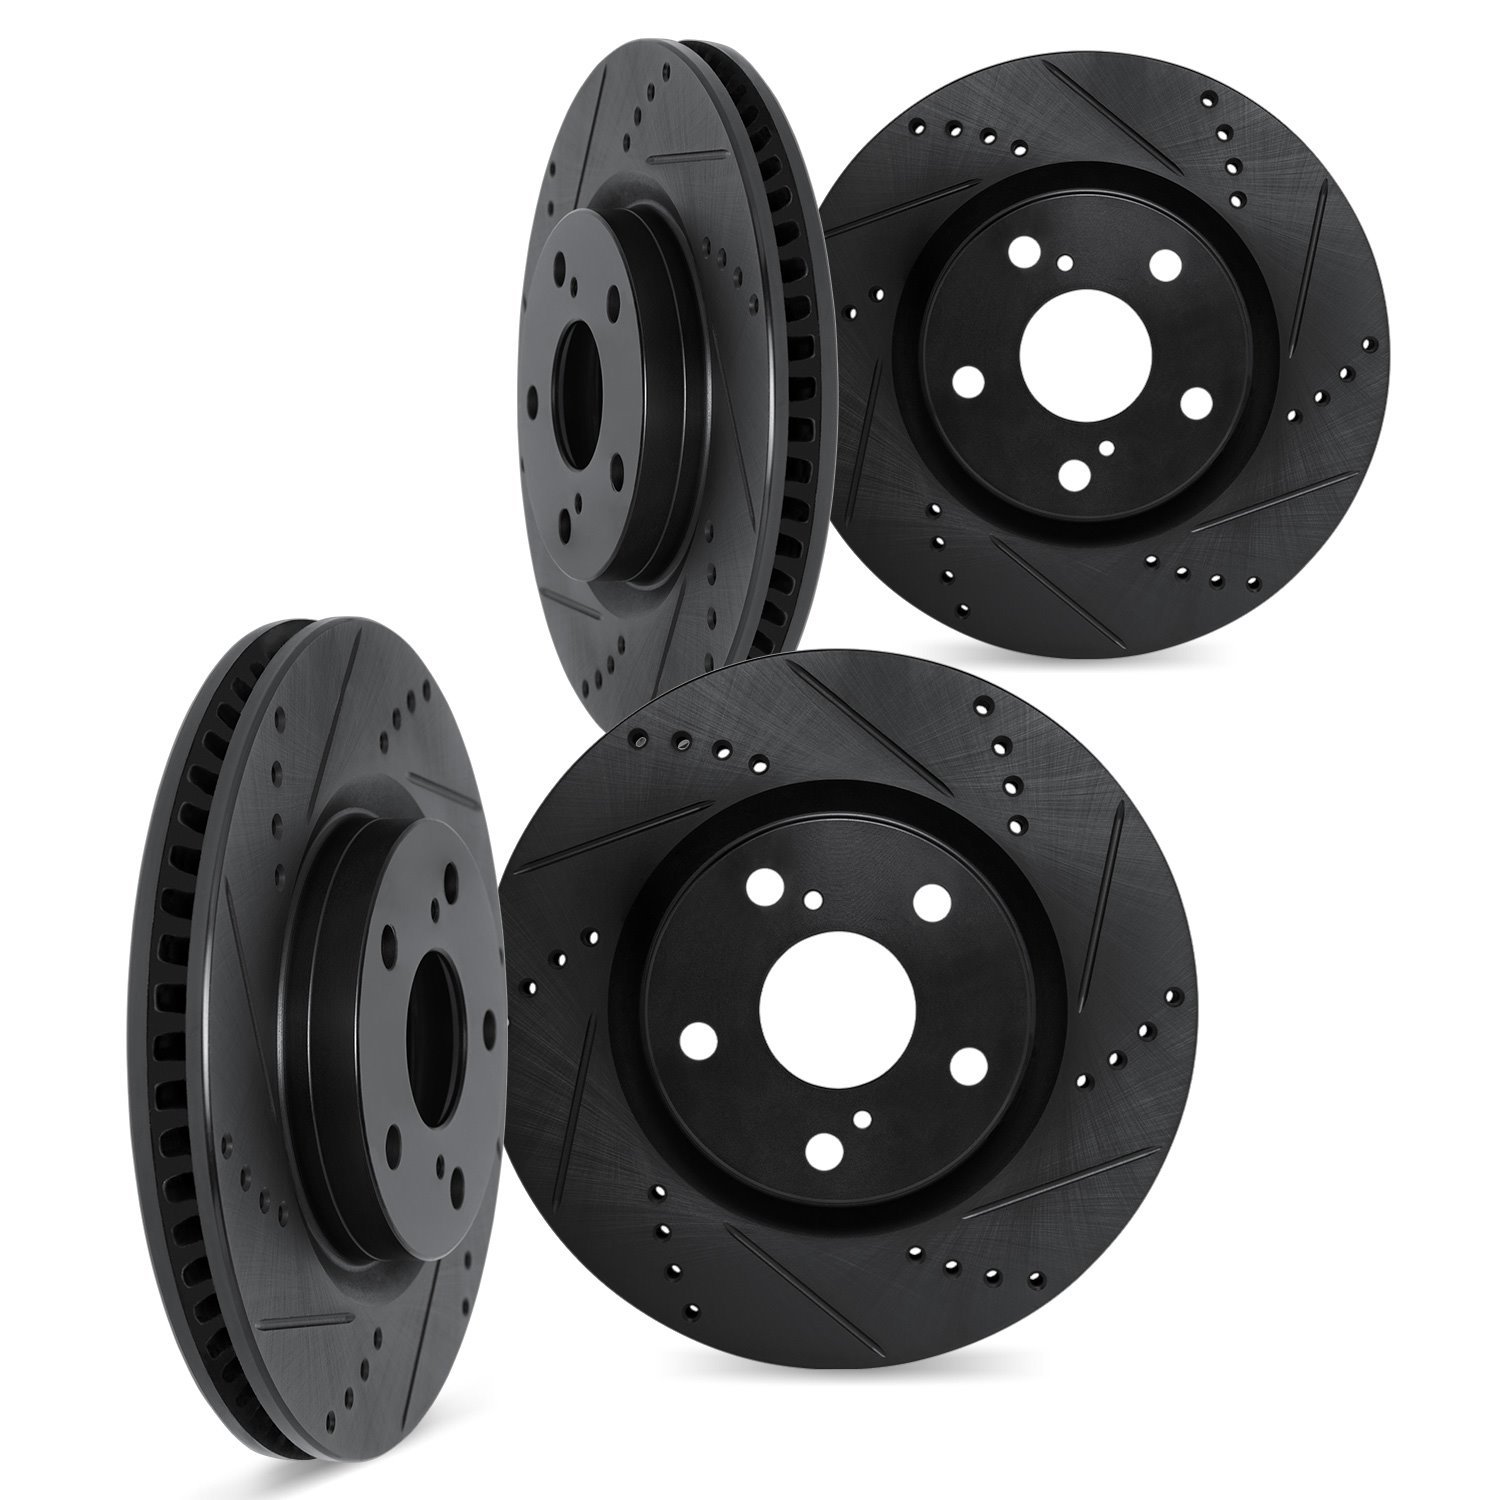 8004-75025 Drilled/Slotted Brake Rotors [Black], 2010-2017 Lexus/Toyota/Scion, Position: Front and Rear